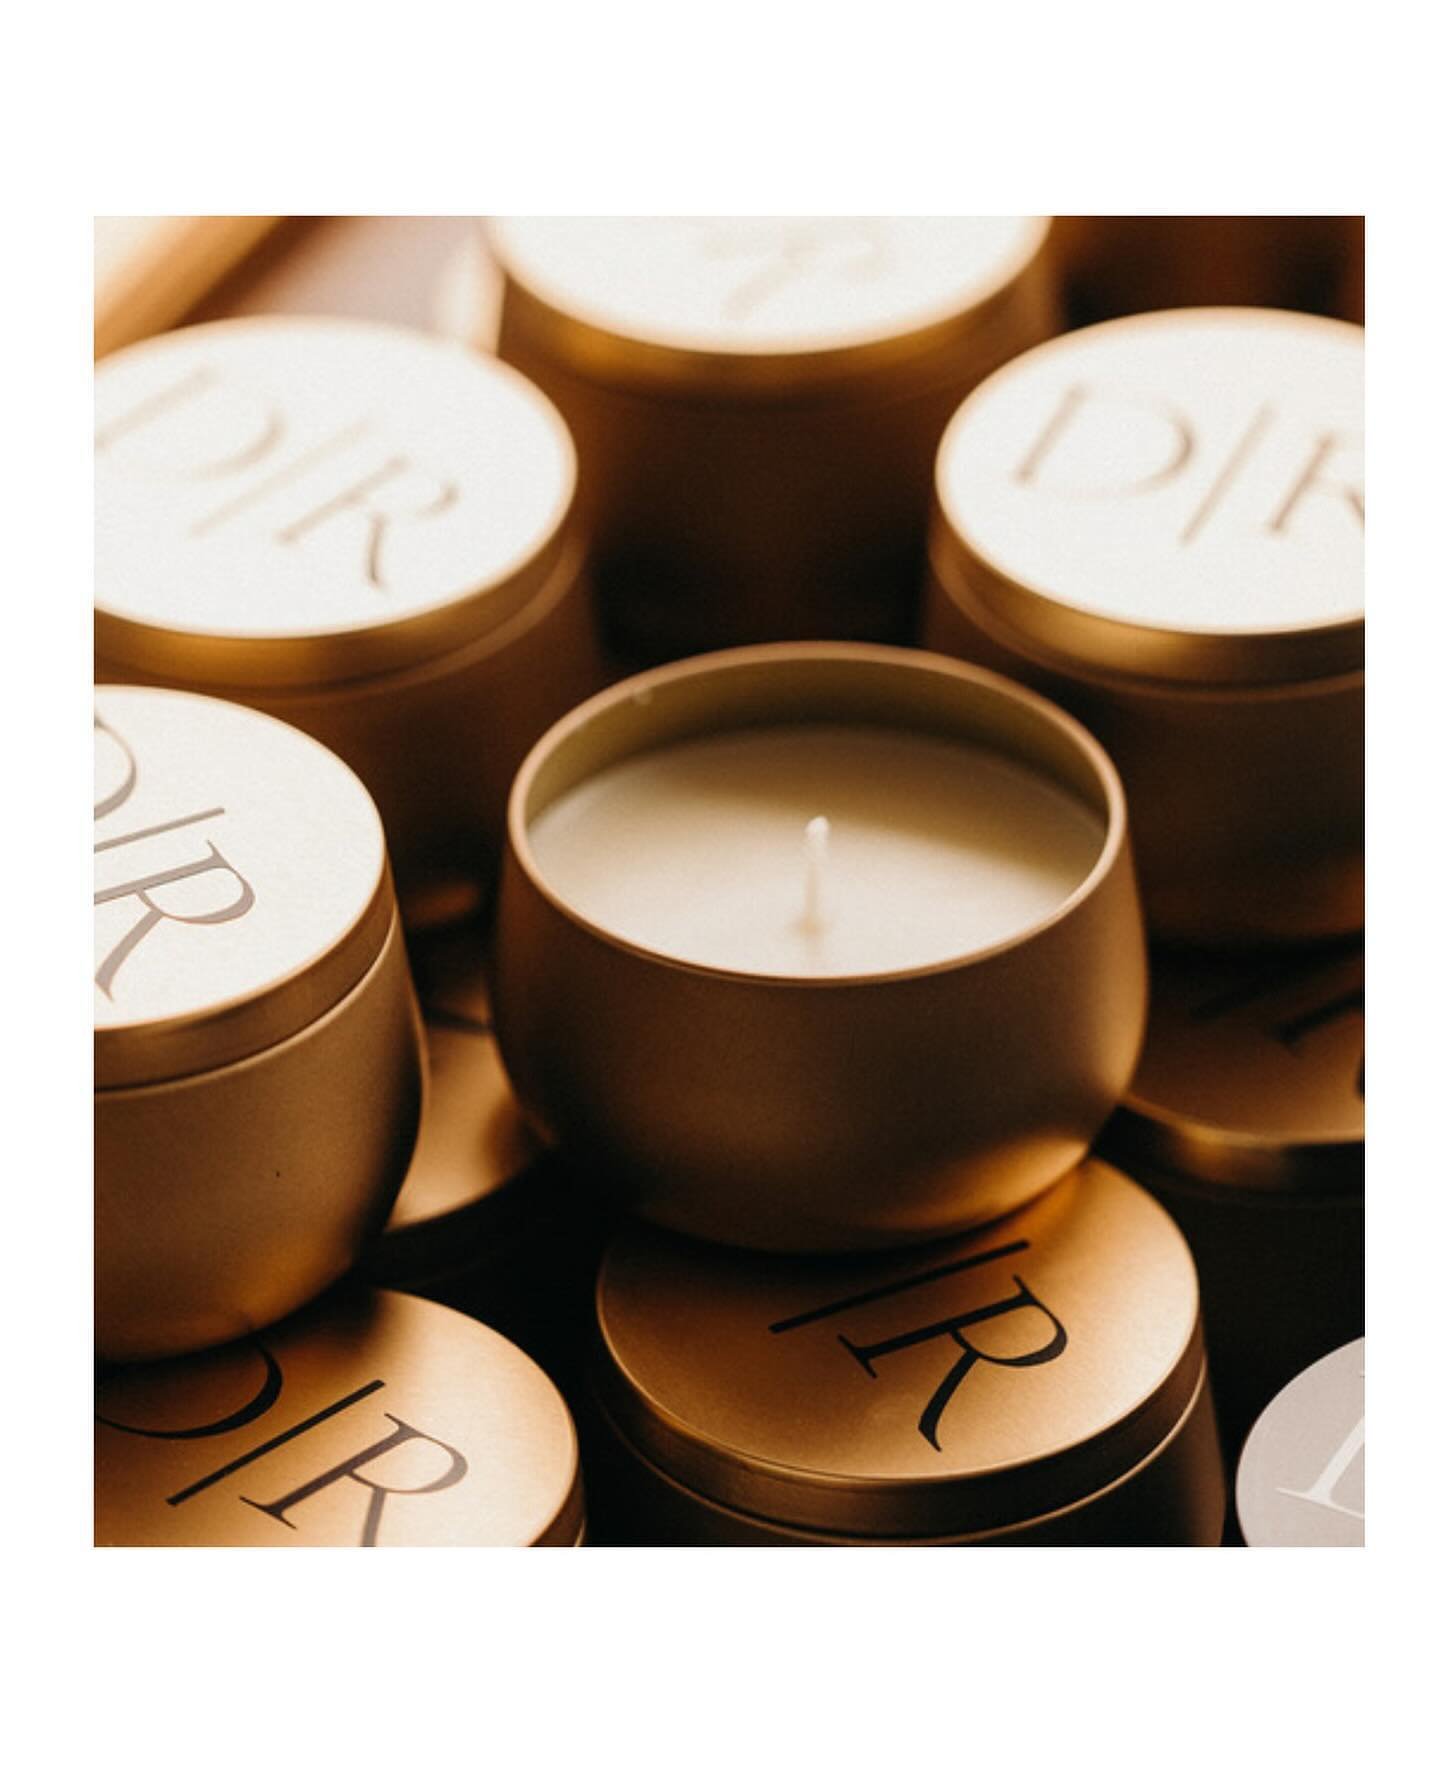 Quite possibly one of the coolest wedding favors I have ever seen. Darian and Robbie each had a signature candle, one called &ldquo;Autumn in Asheville&rdquo; and the other &ldquo;Summer in Durham&rdquo; with their initials on the lid. They are beaut